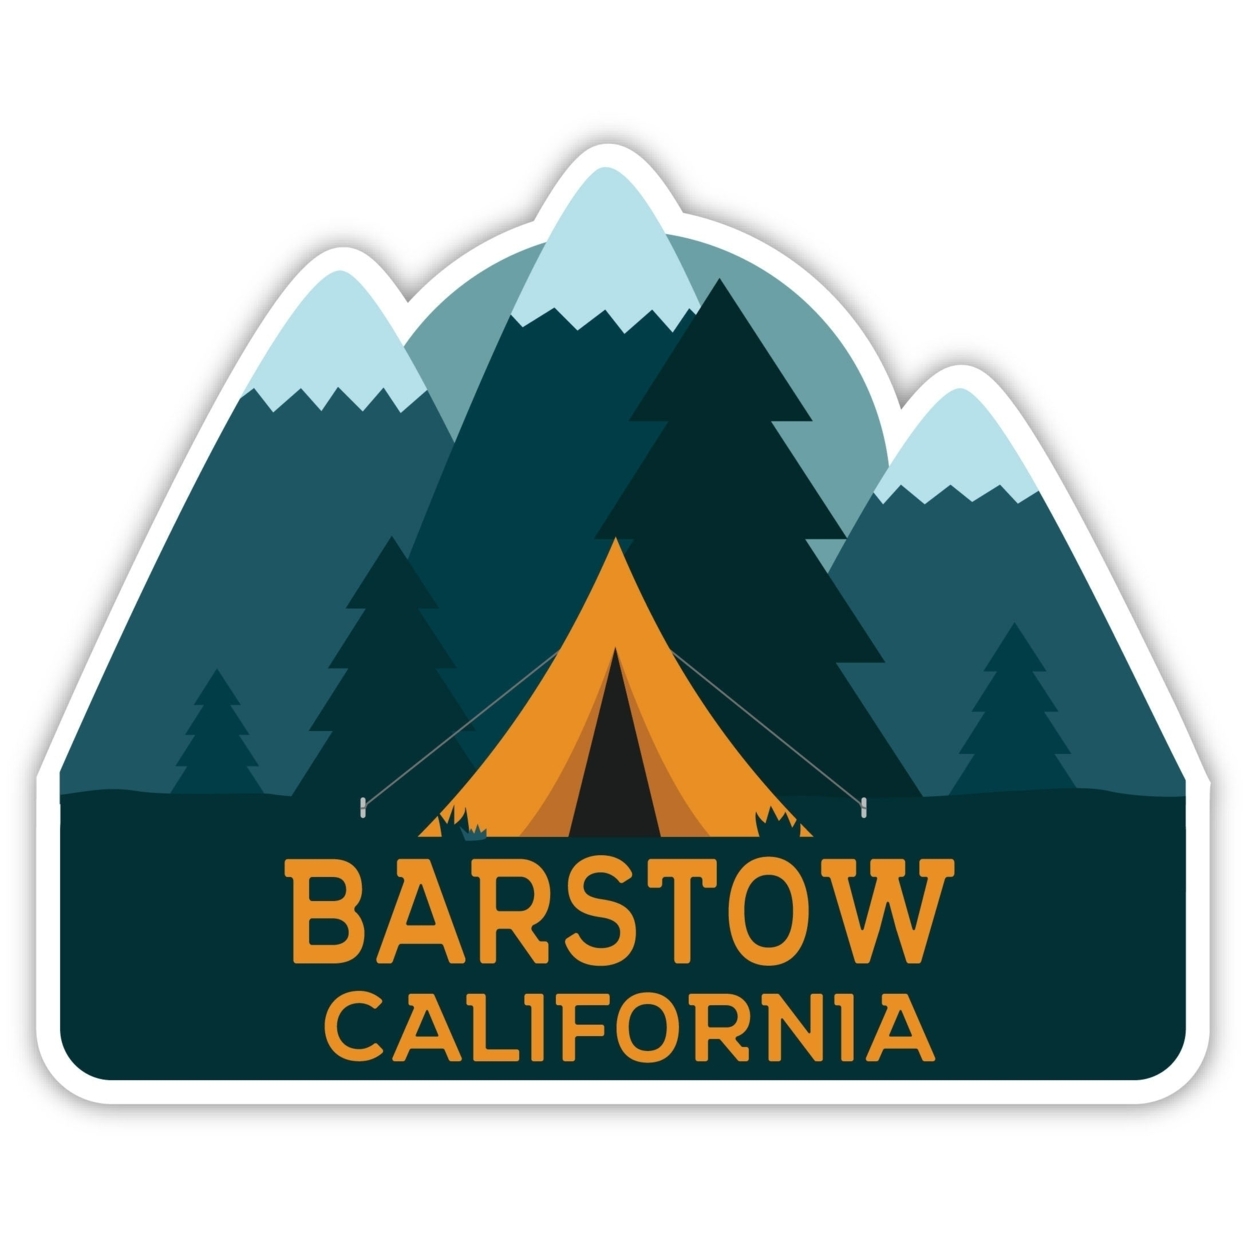 Barstow California Souvenir Decorative Stickers (Choose Theme And Size) - Single Unit, 6-Inch, Adventures Awaits